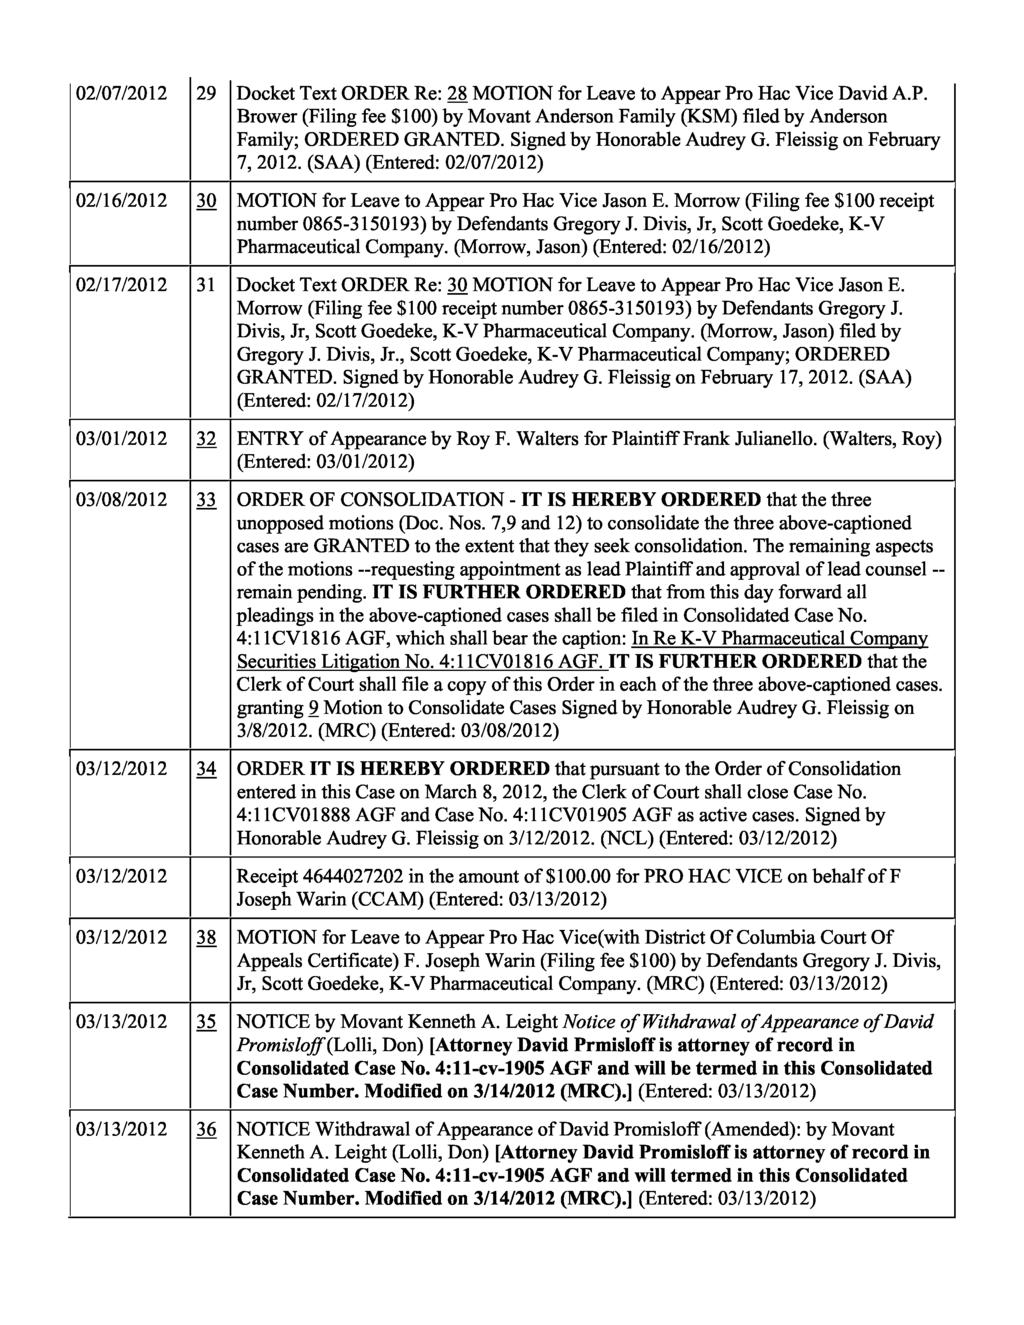 02/07/2012 29 Docket Text ORDER Re: 28 MOTION for Leave to Appear Pro Hac Vice David A.P. Brower (Filing fee $100) by Movant Anderson Family (KSM) filed by Anderson Family; ORDERED GRANTED.